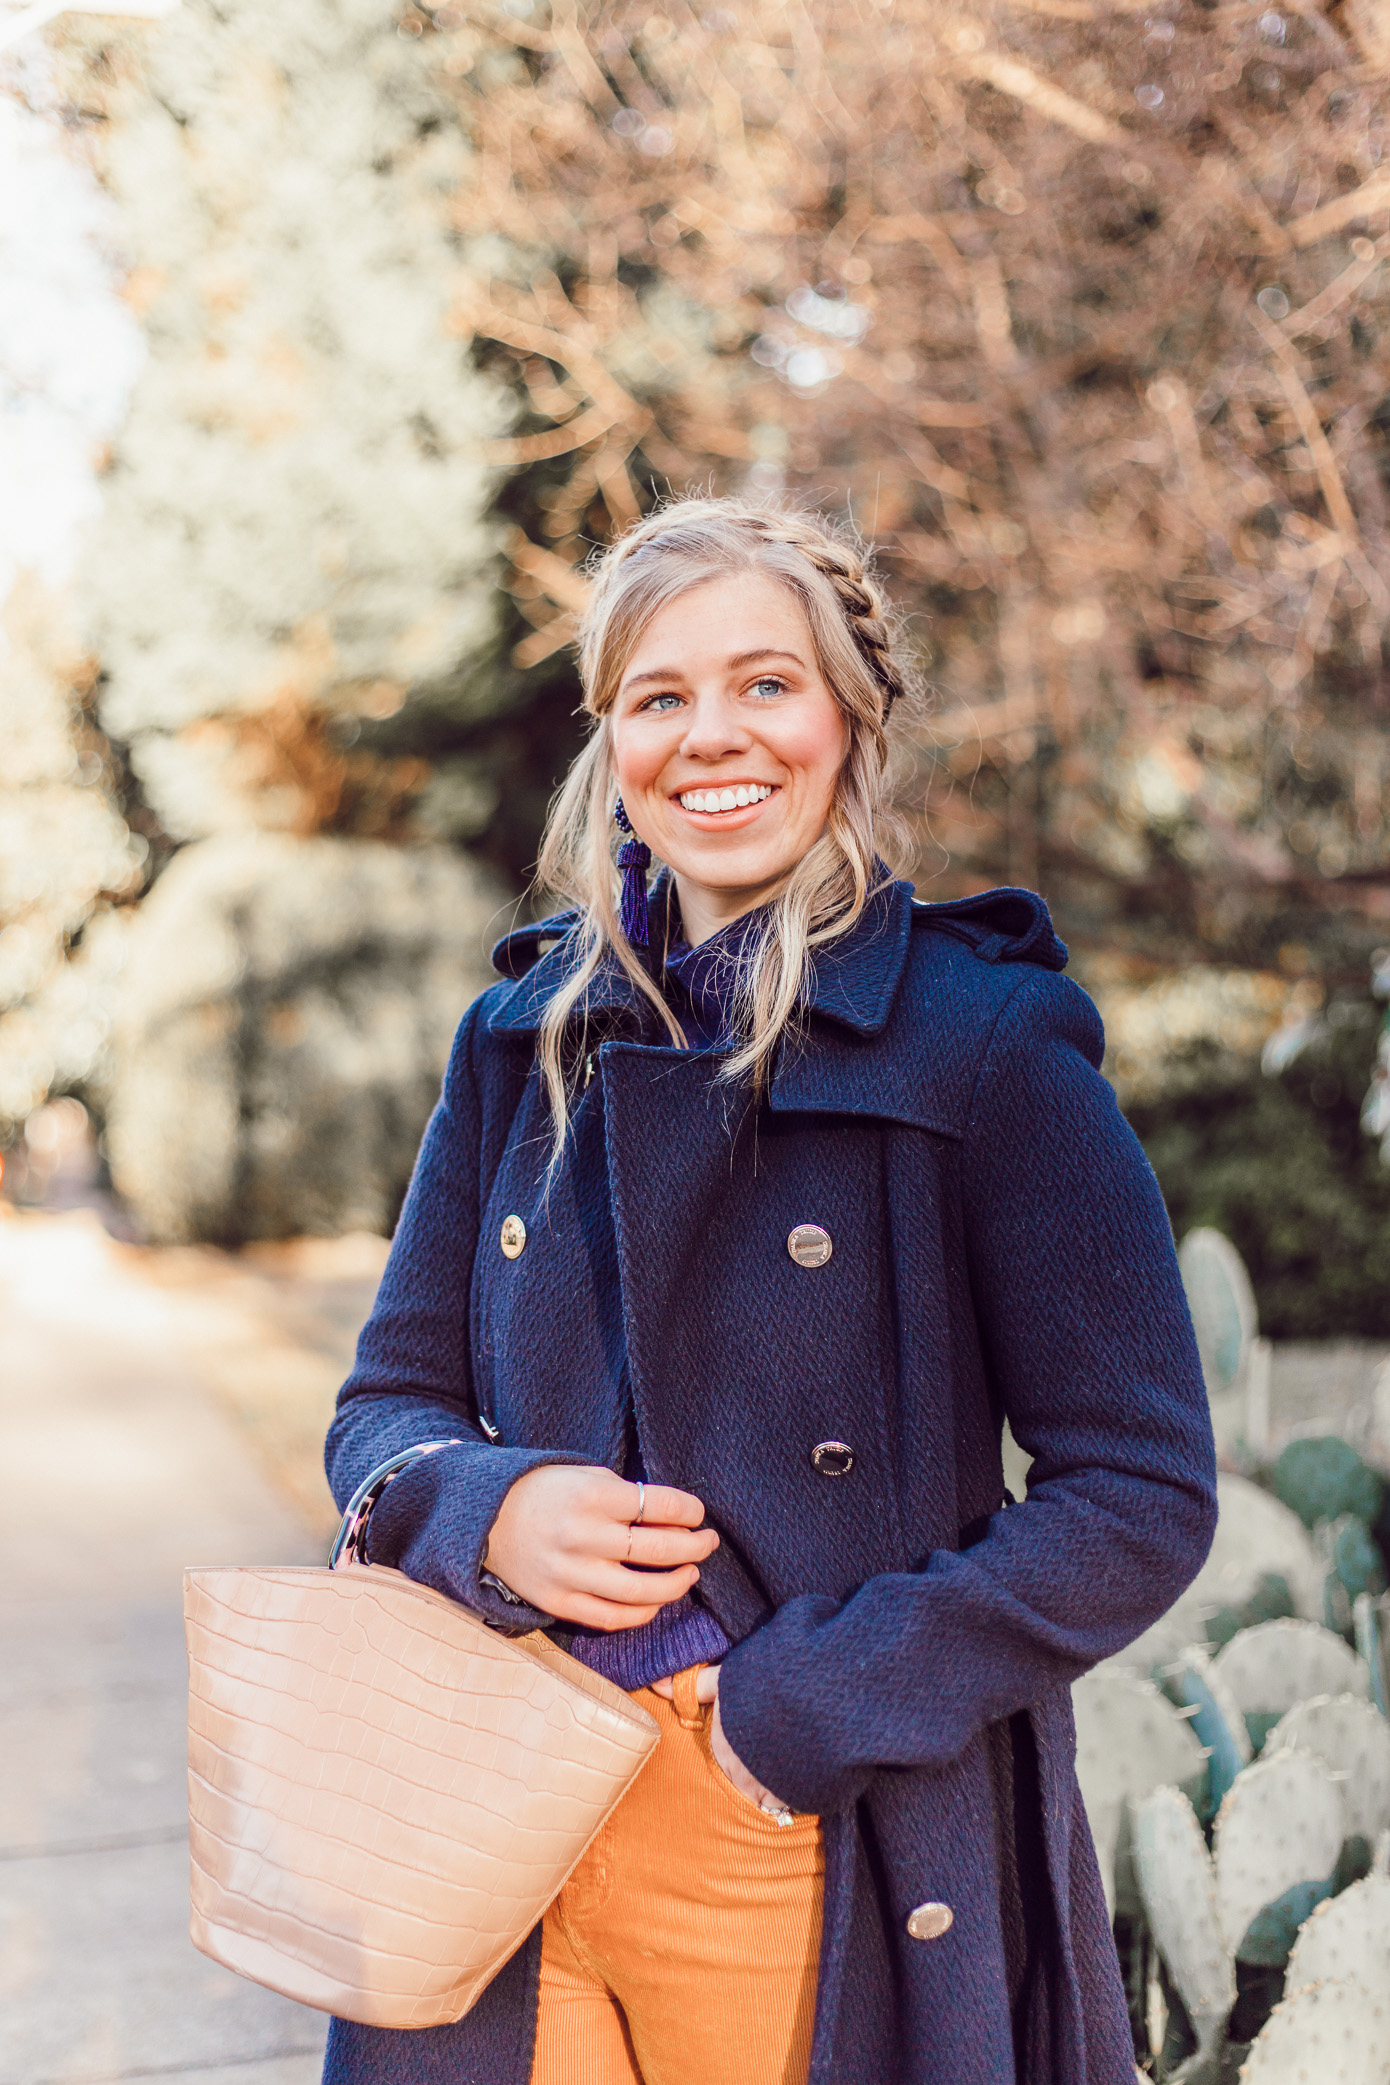 Navy Military Coat, Crown Braid | How to Style Wide-Leg Crop Pants featured on Louella Reese